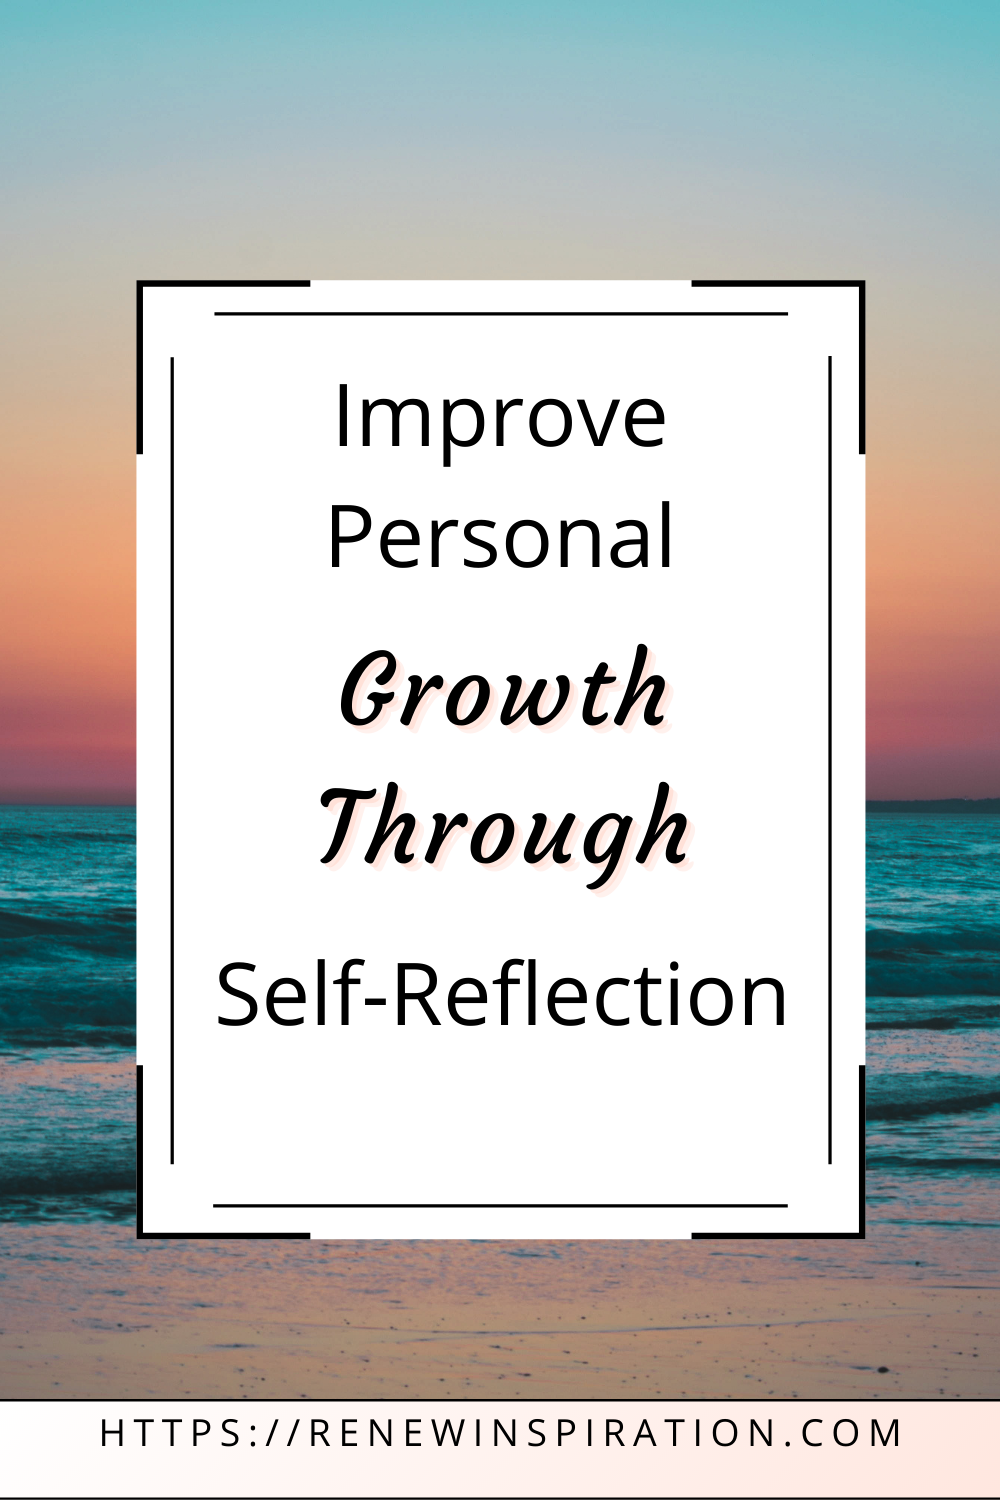 Renew Inspiration, Improve Personal Growth Through Self-Reflection